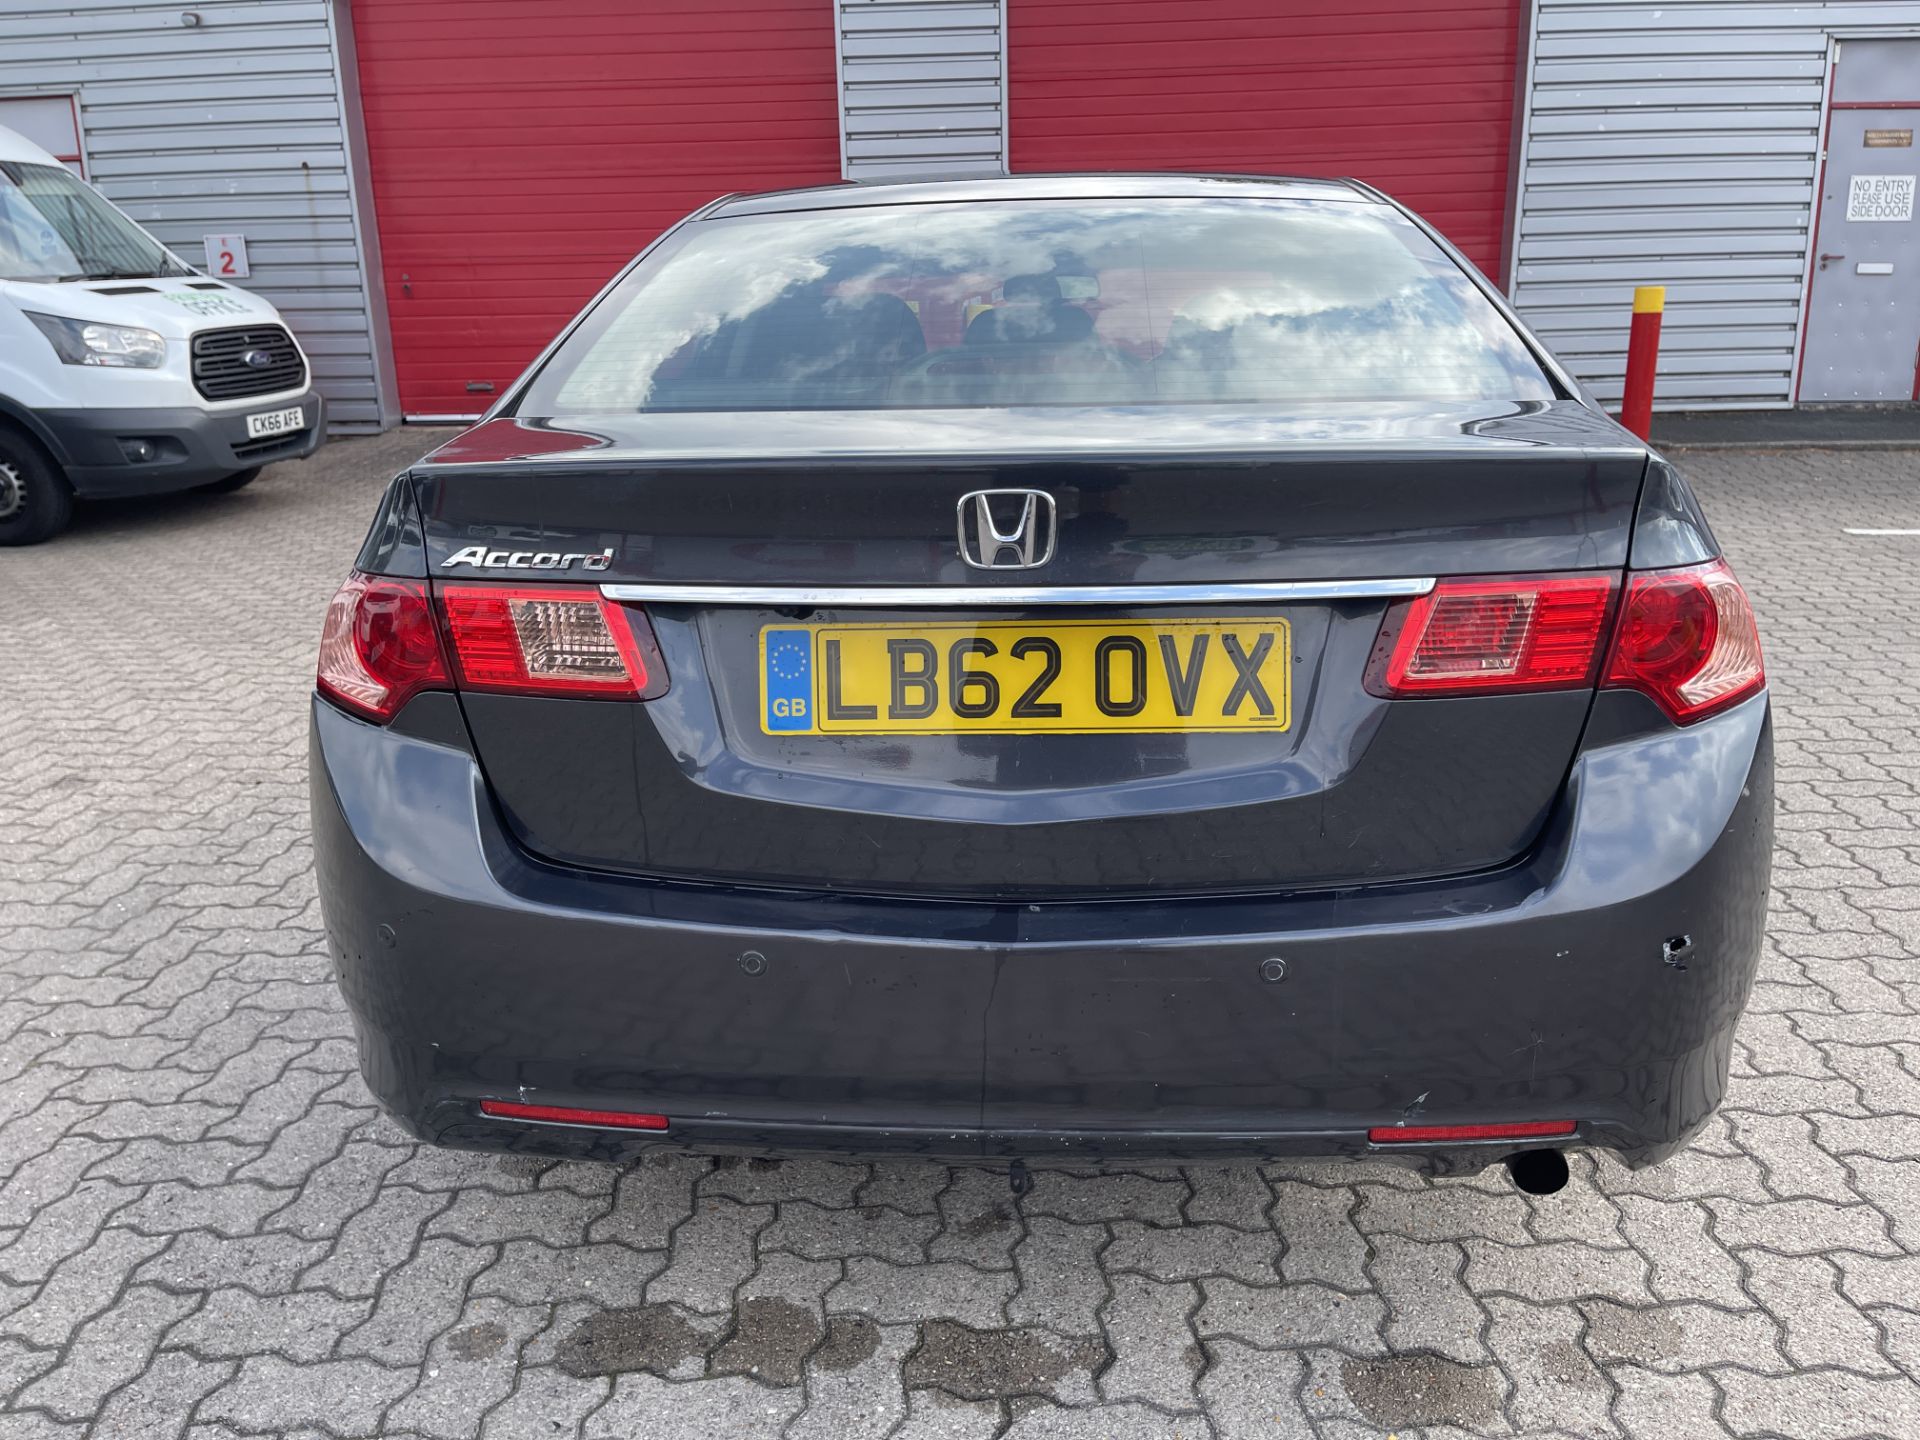 Honda Accord EX-I - VTEC Automatic - LB62 OVX - Clean Air Charge Exempt - Image 6 of 28